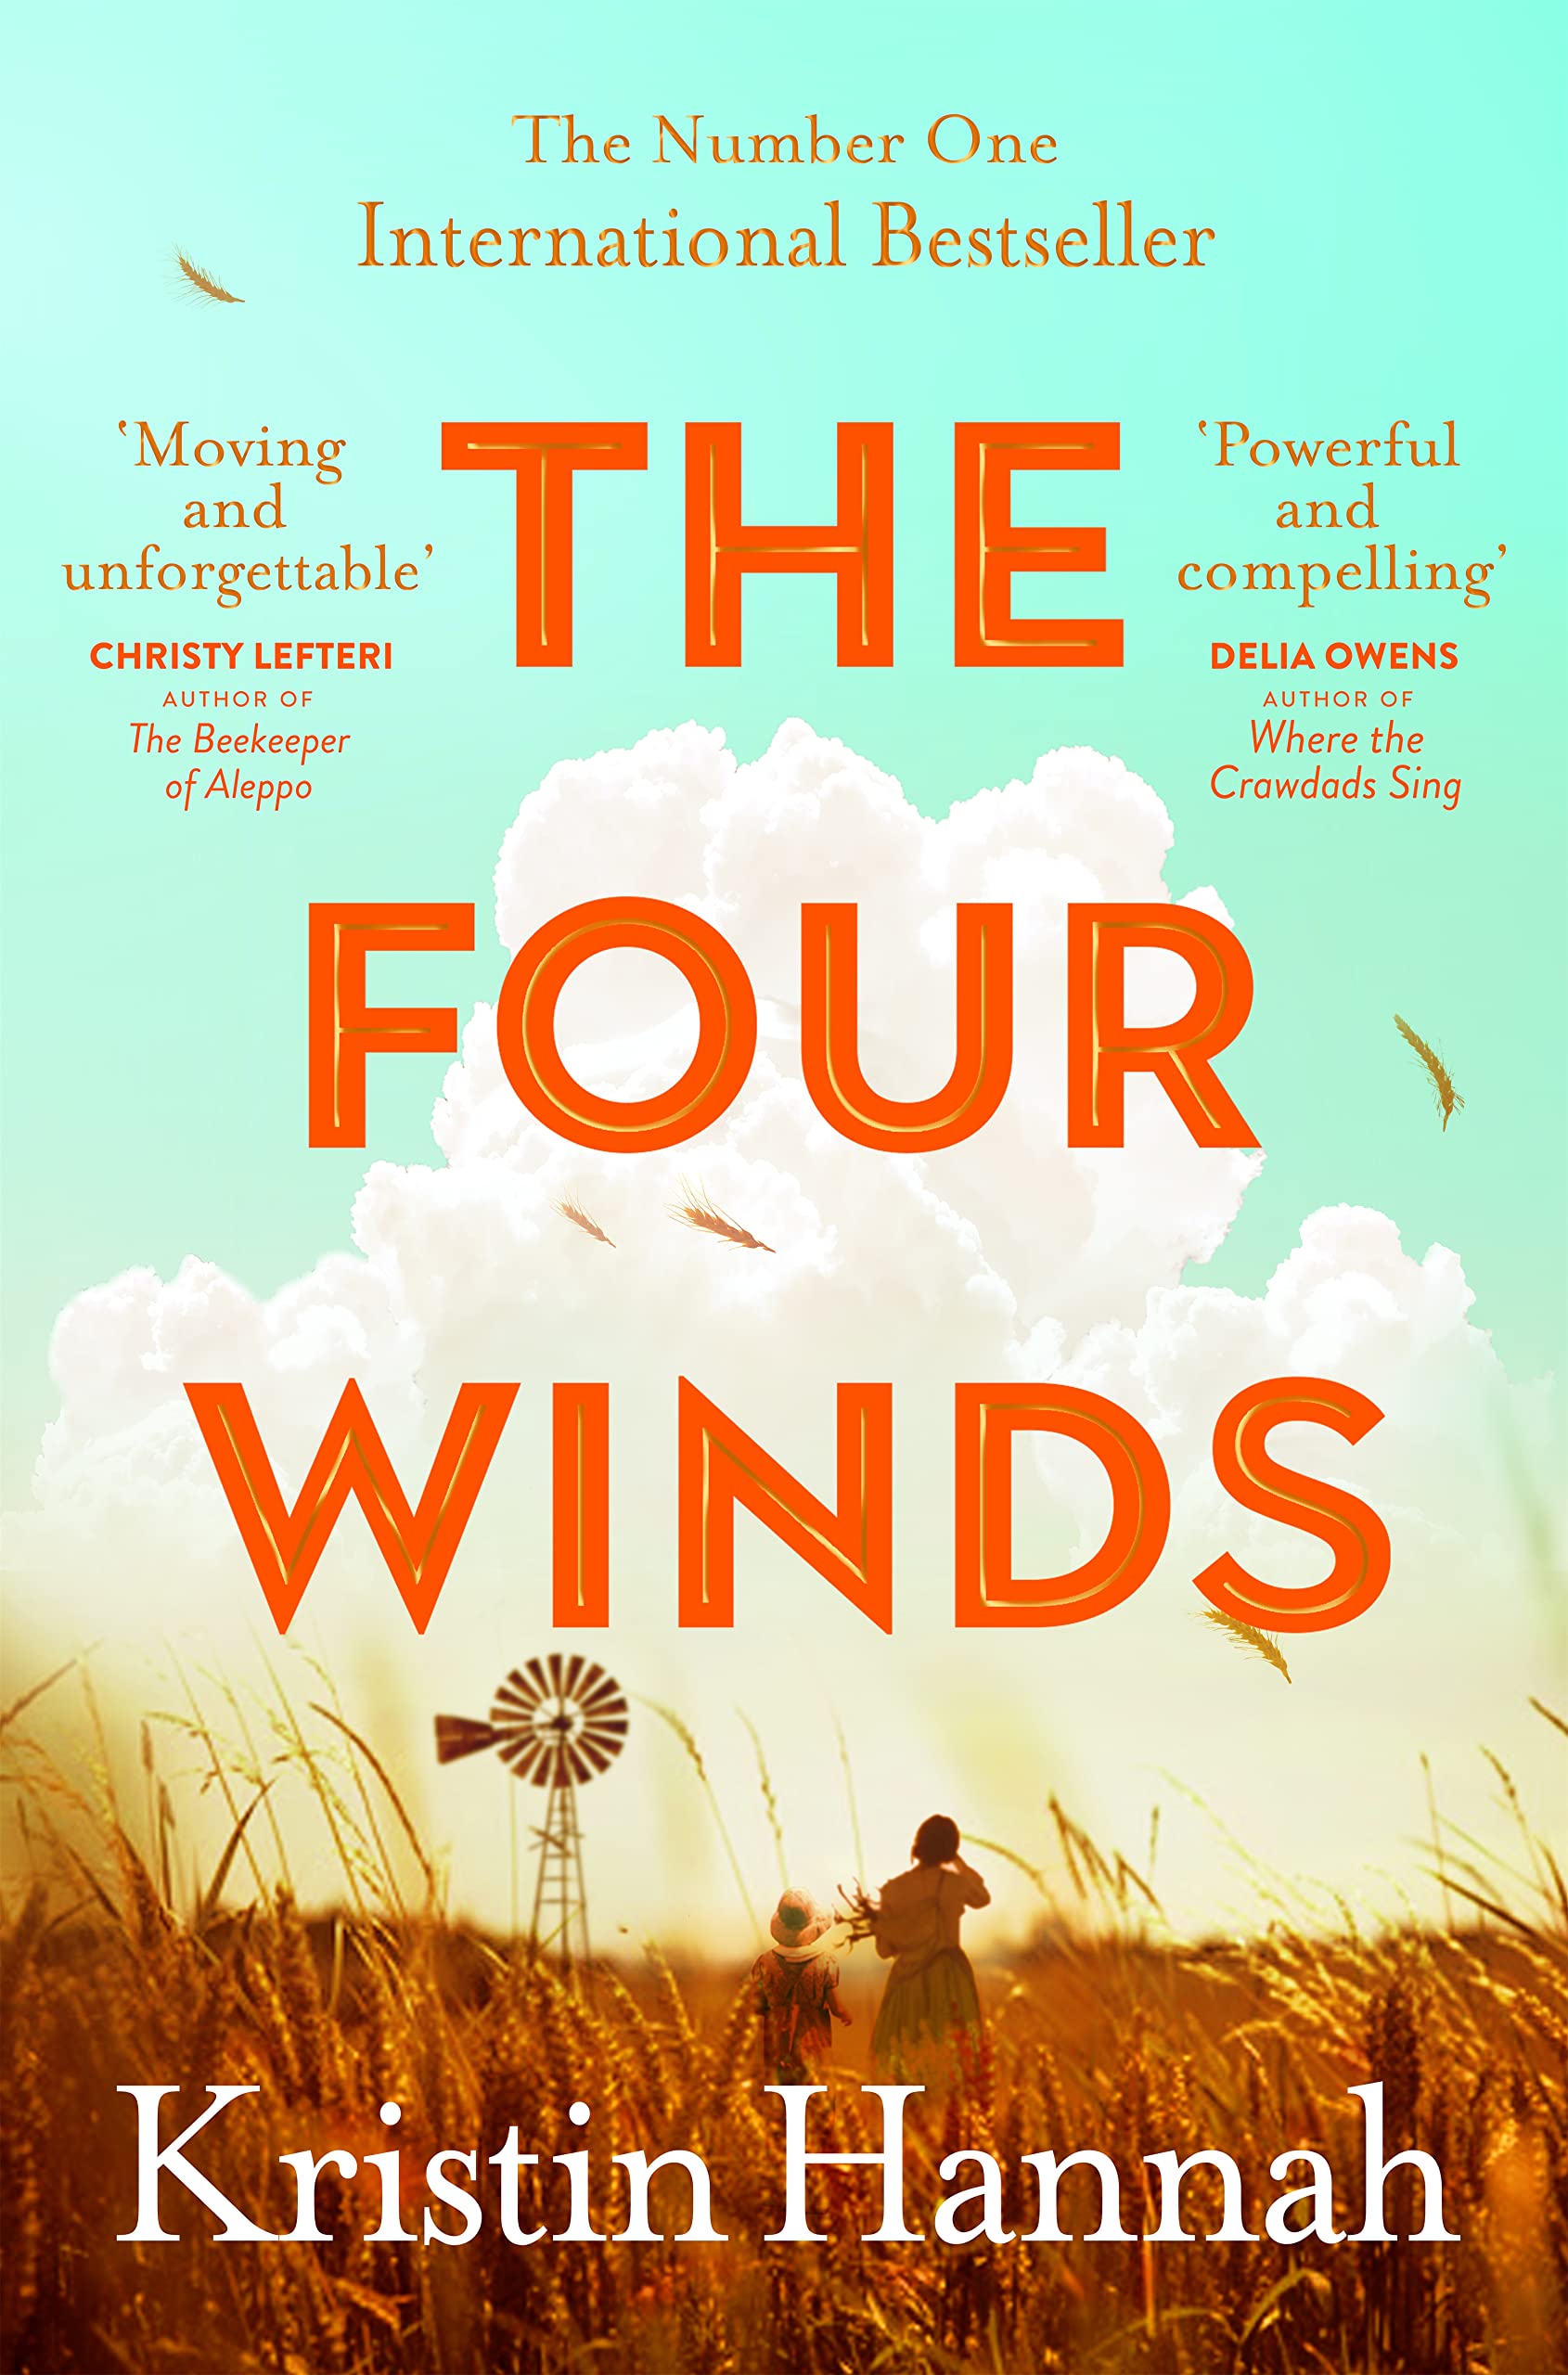 Book Cover - The Four Winds